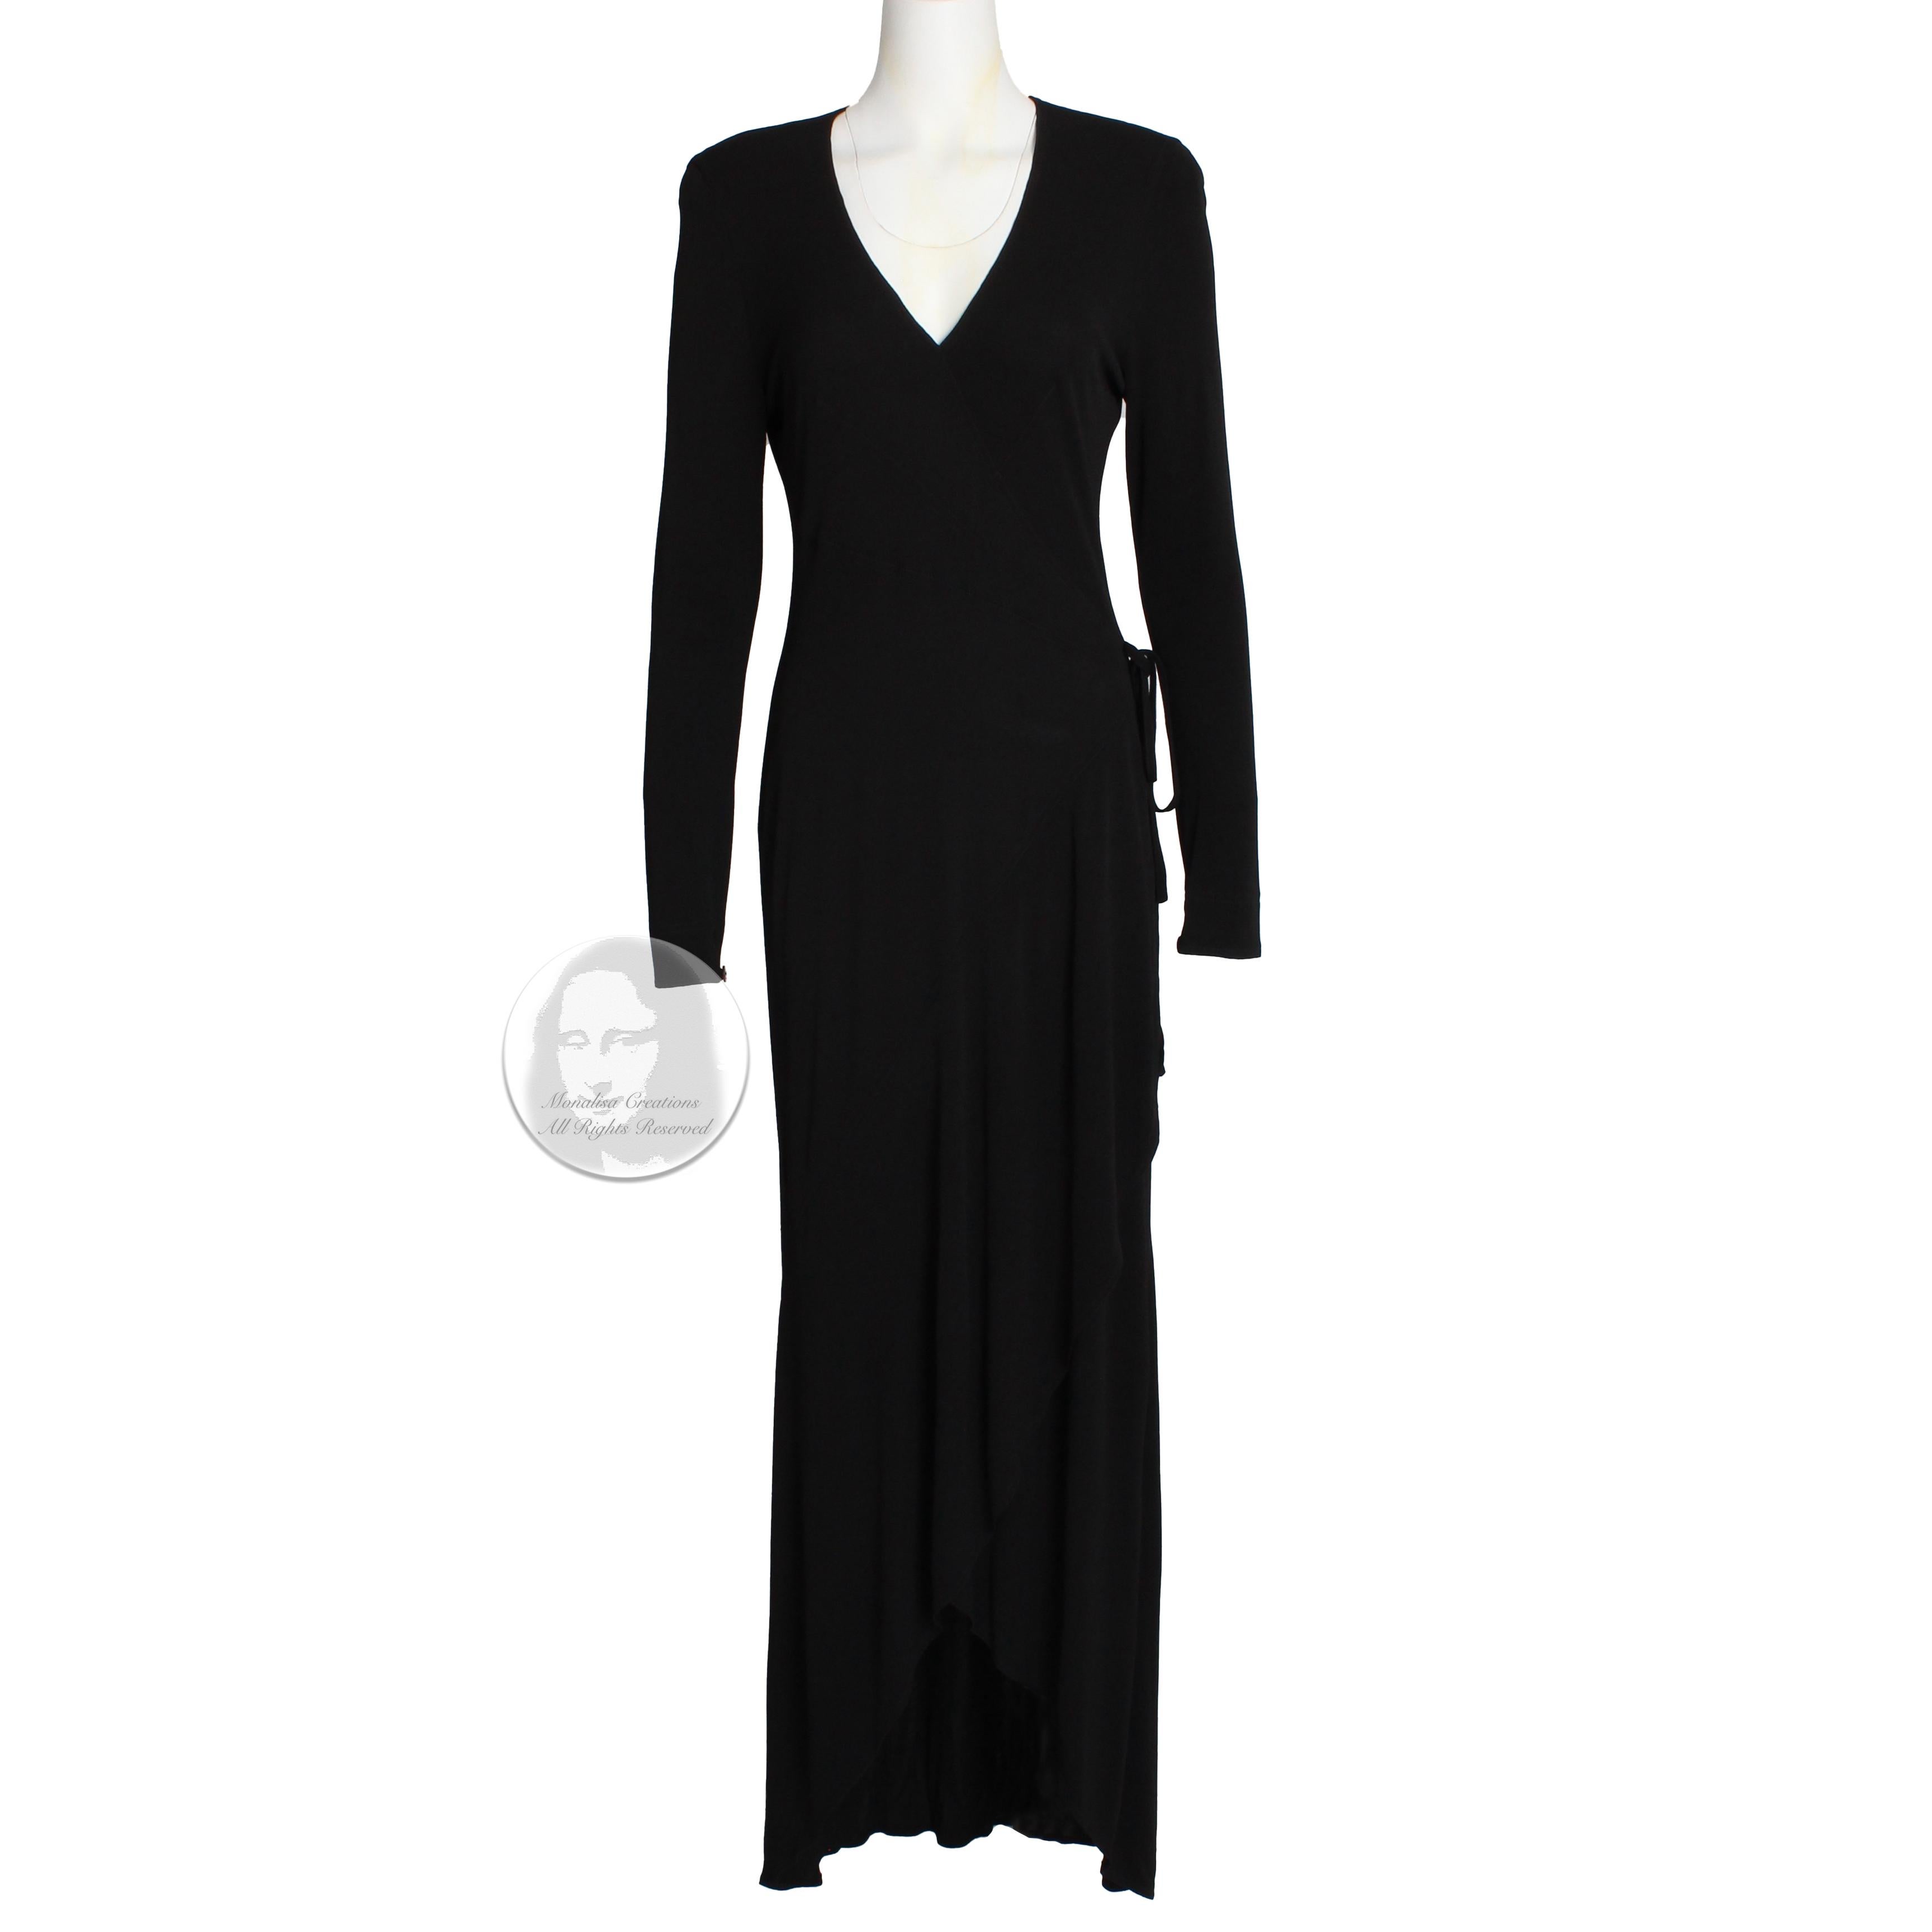 Fabulous Jean Muir! This understated yet stunning long maxi dress features Muir's signature design elements: flowing jersey fabric, tons of movement and figure-flattering construction.  Made from black jersey, it has small shoulder pads, a low cut